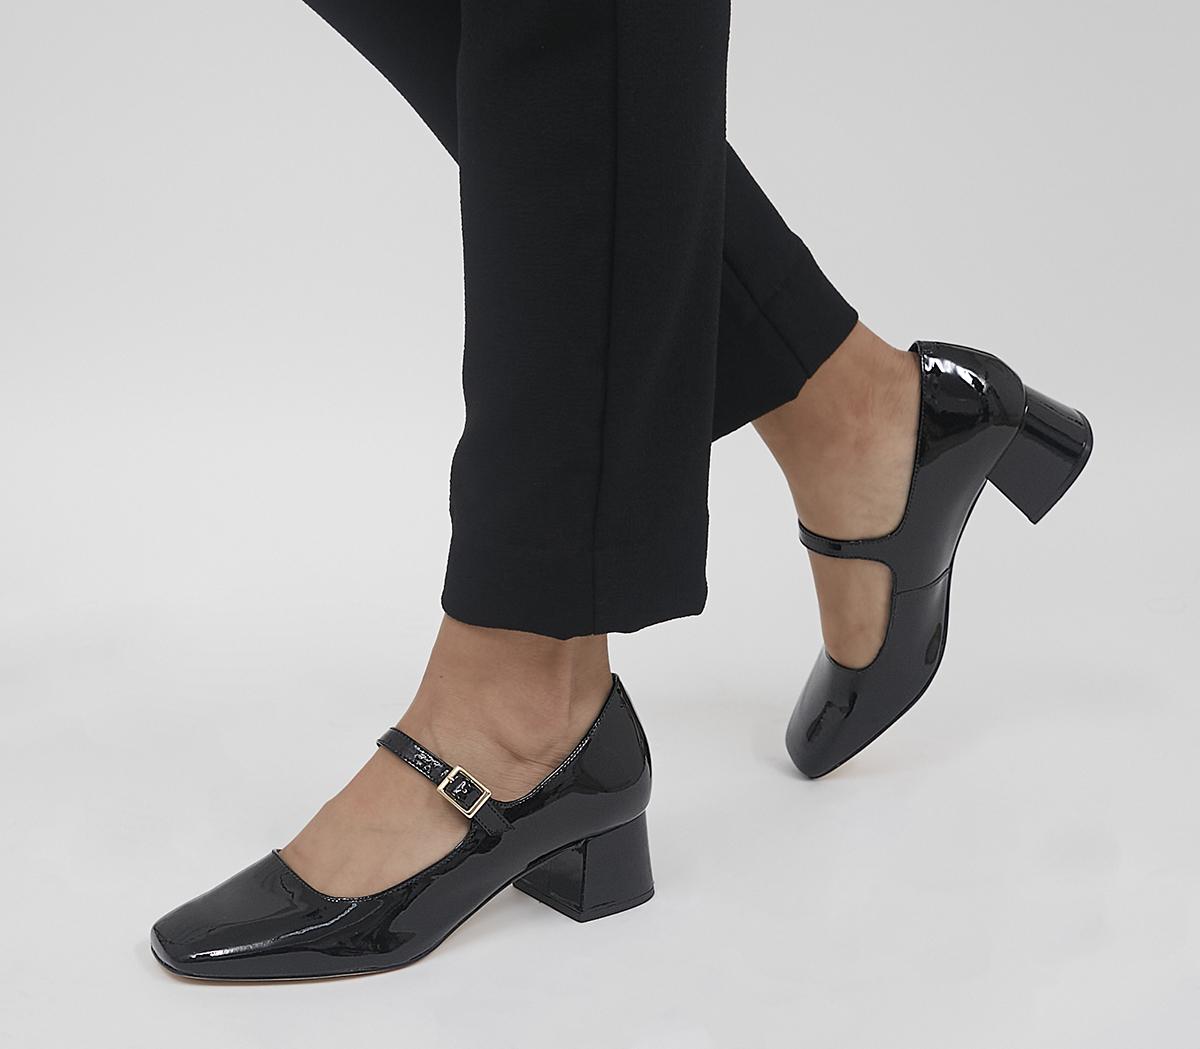 OfficeMaleah Low Block Mary Janes HeelsBlack Patent Leather